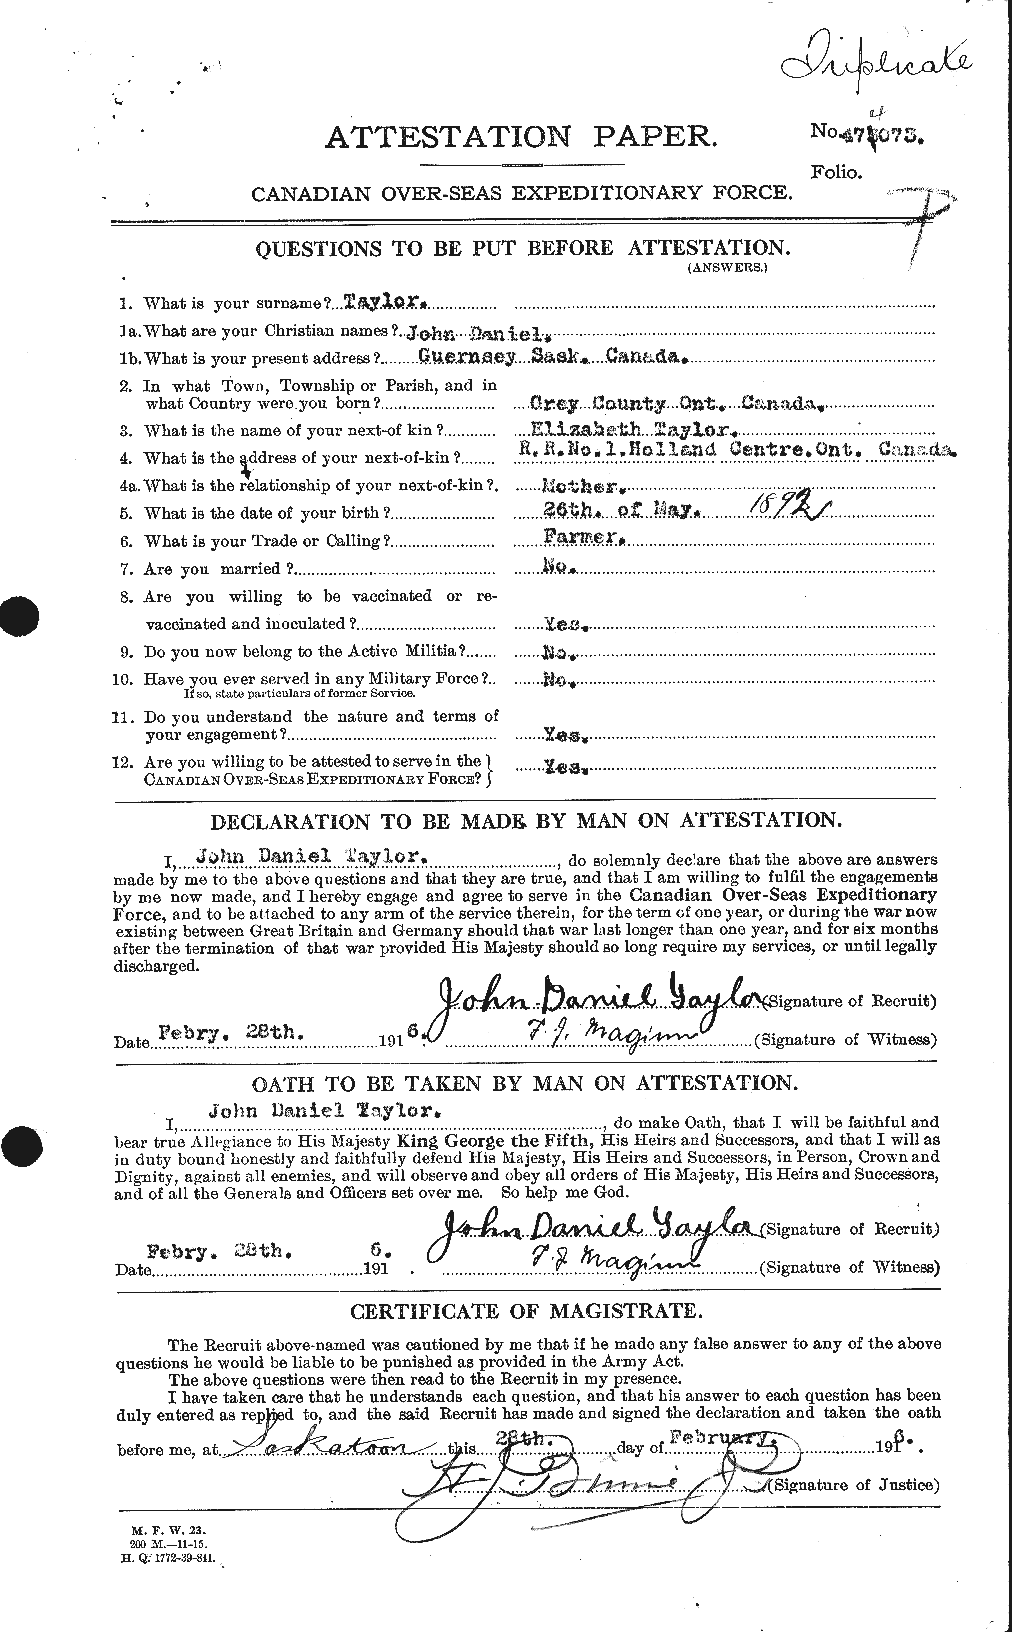 Personnel Records of the First World War - CEF 627065a